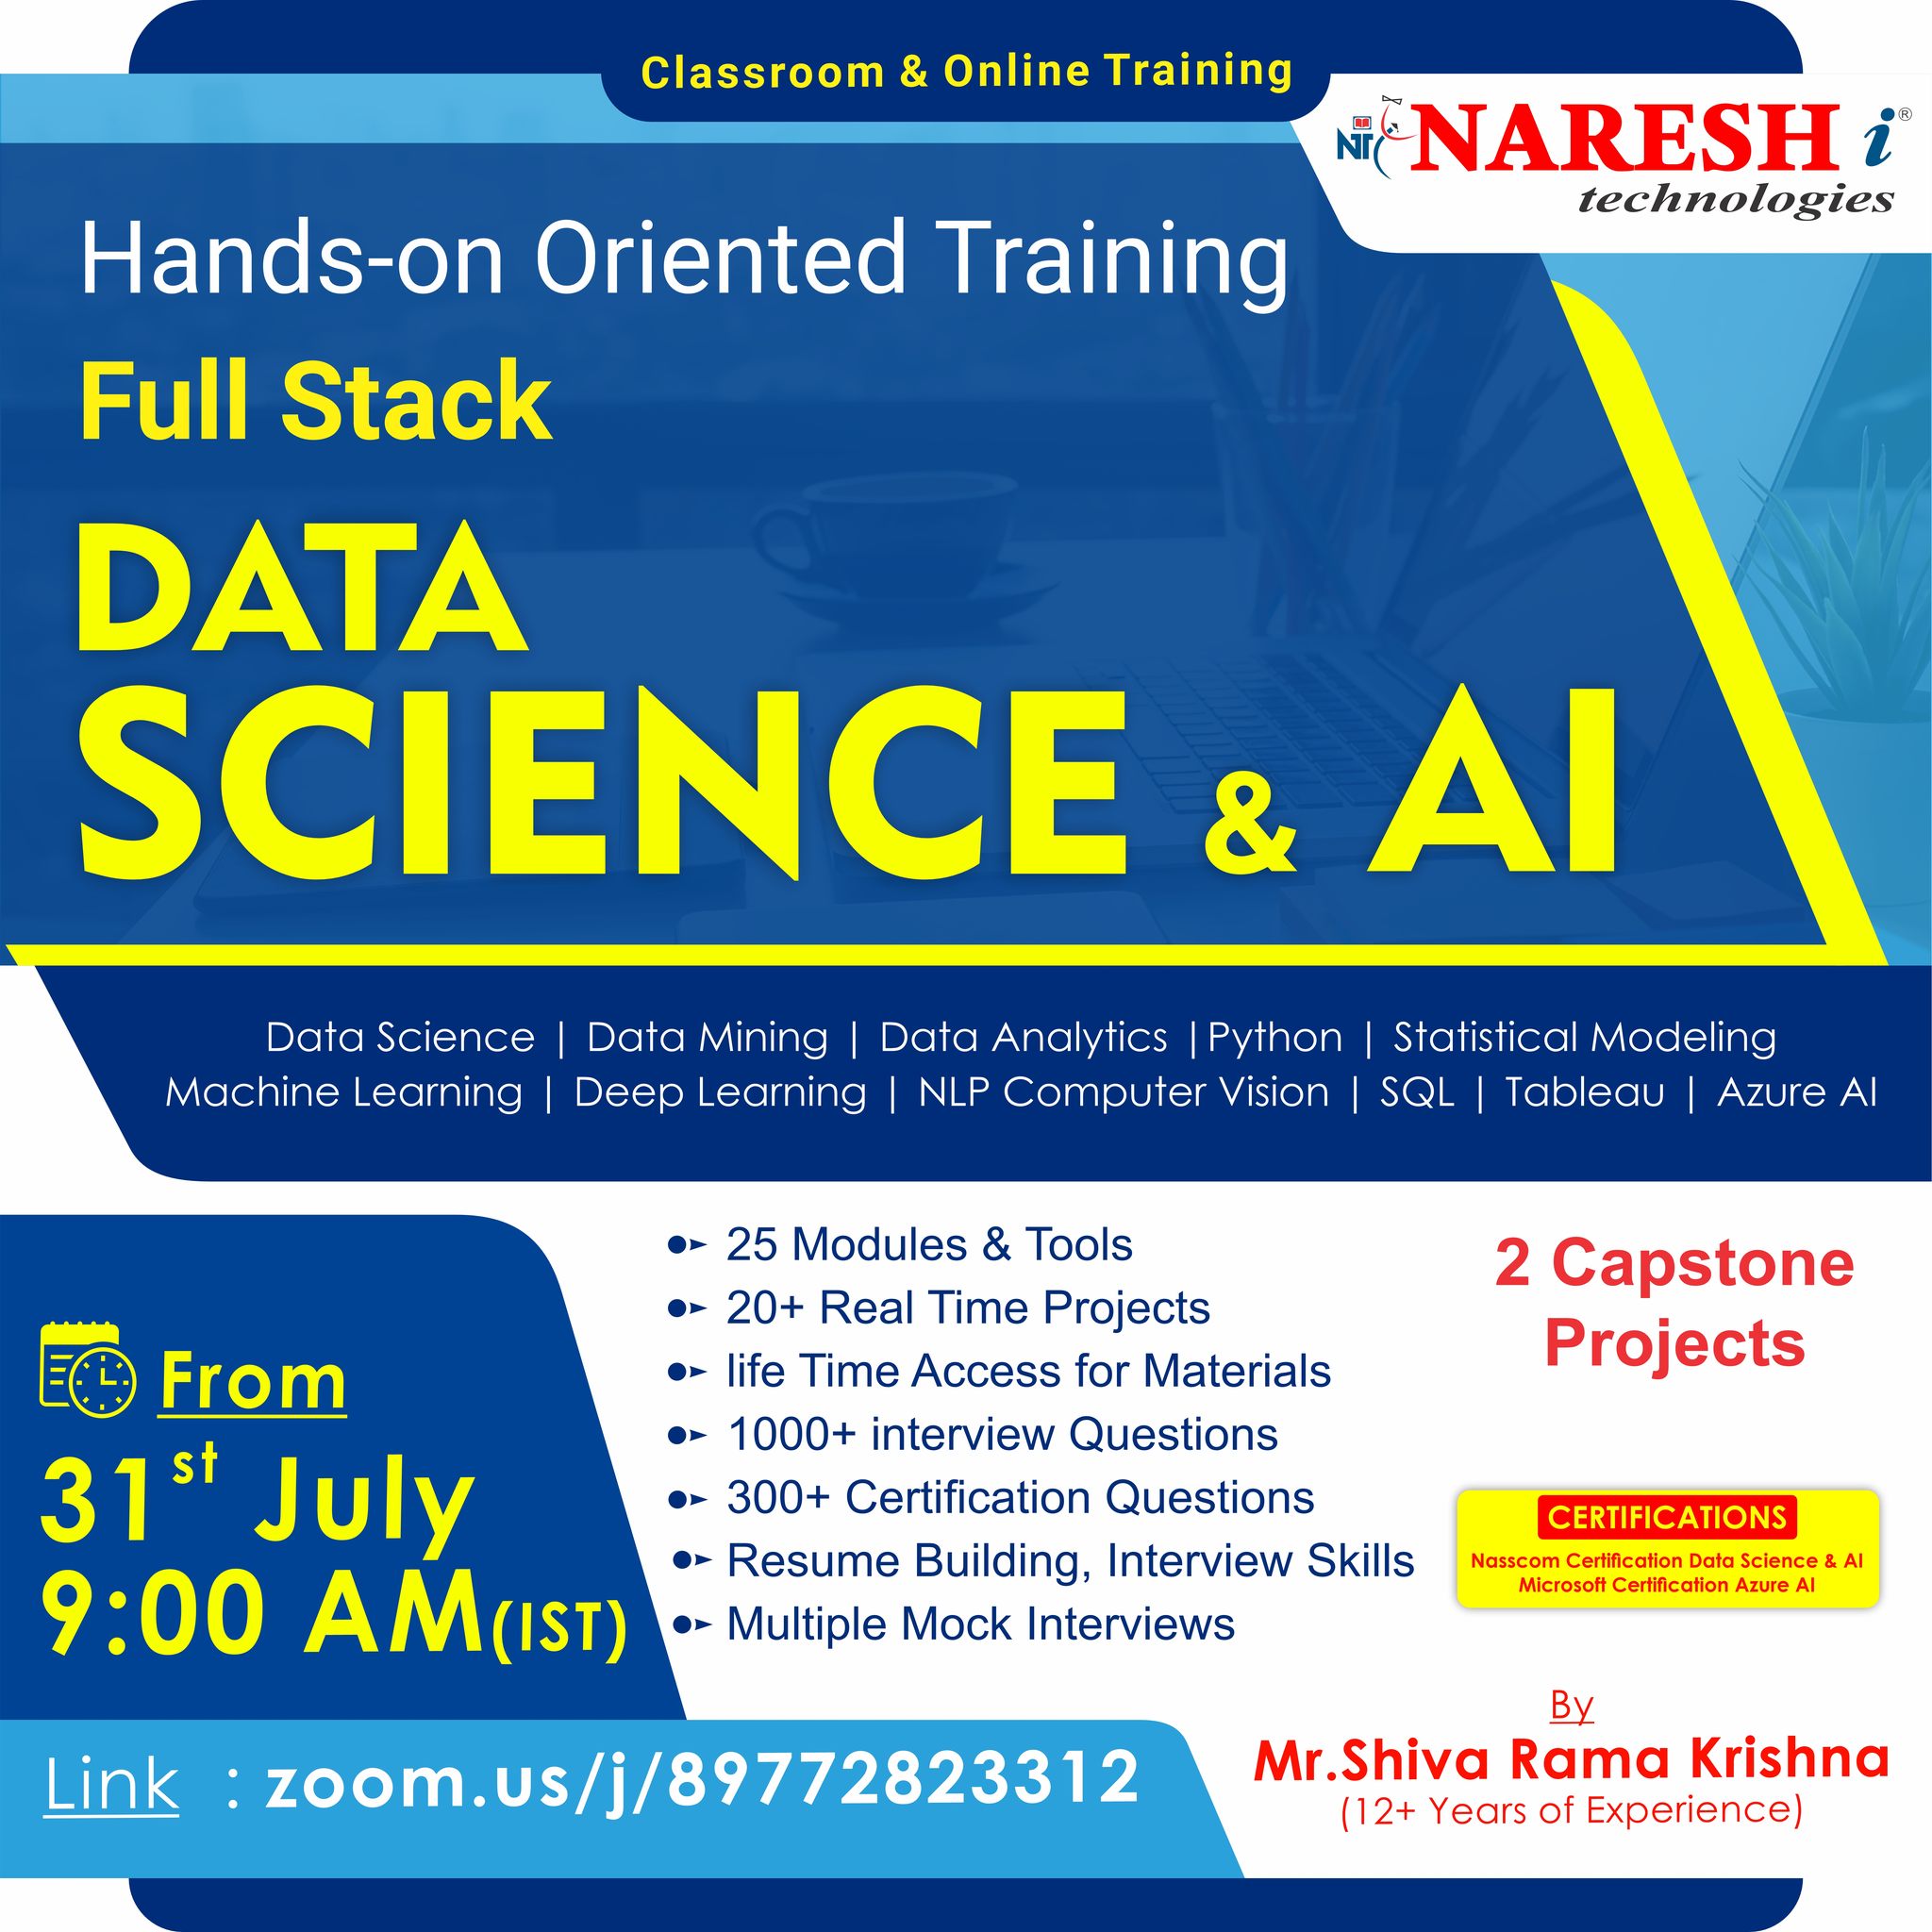 Free Demo On Full Stack Data Science & AI in NareshIT, Online Event